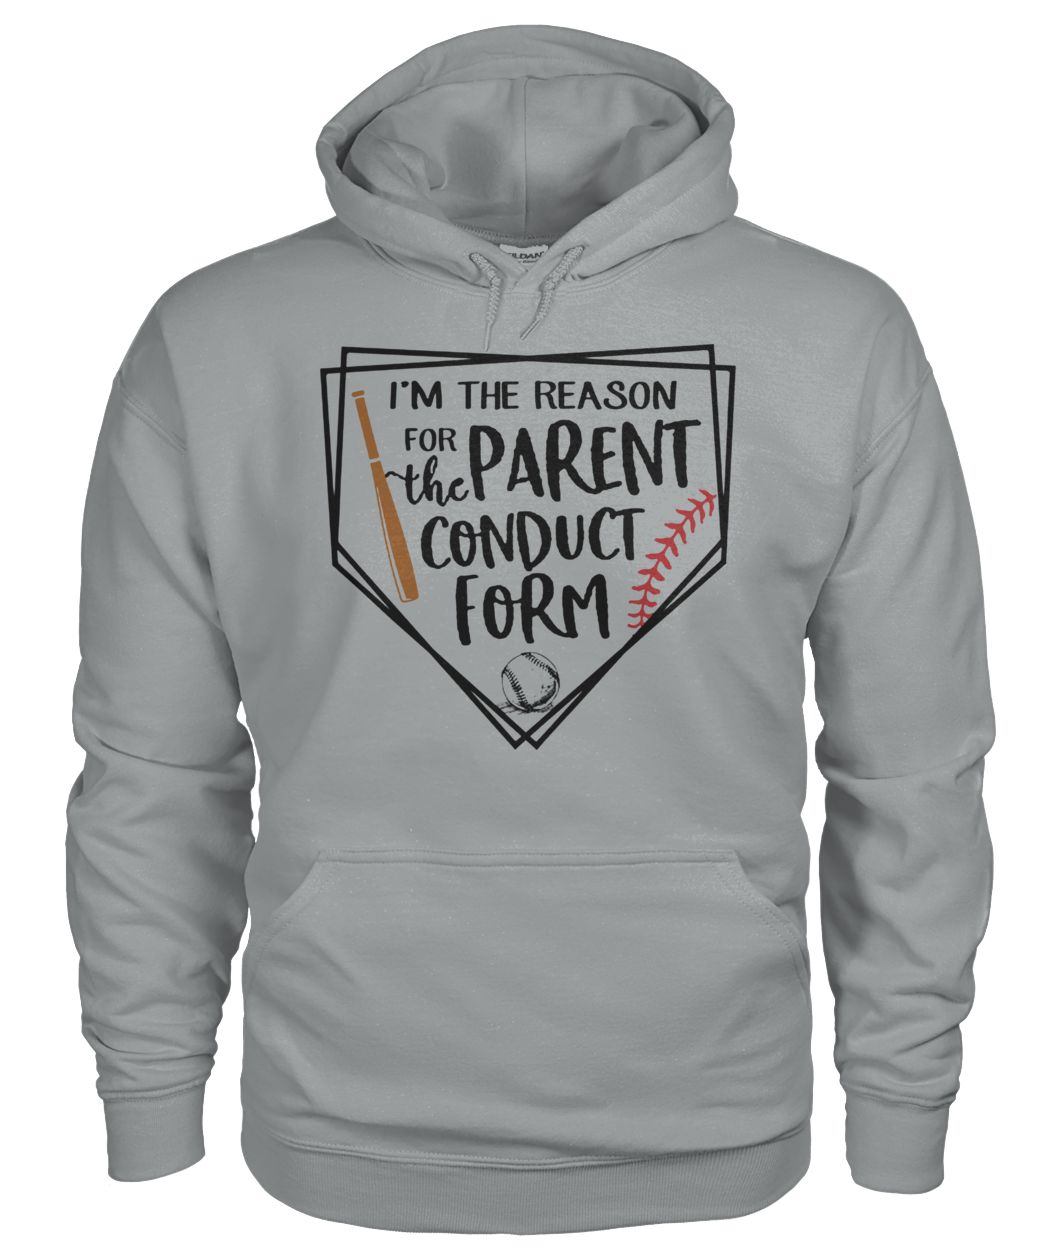 I'm the reason for the parent conduct form baseball gildan hoodie